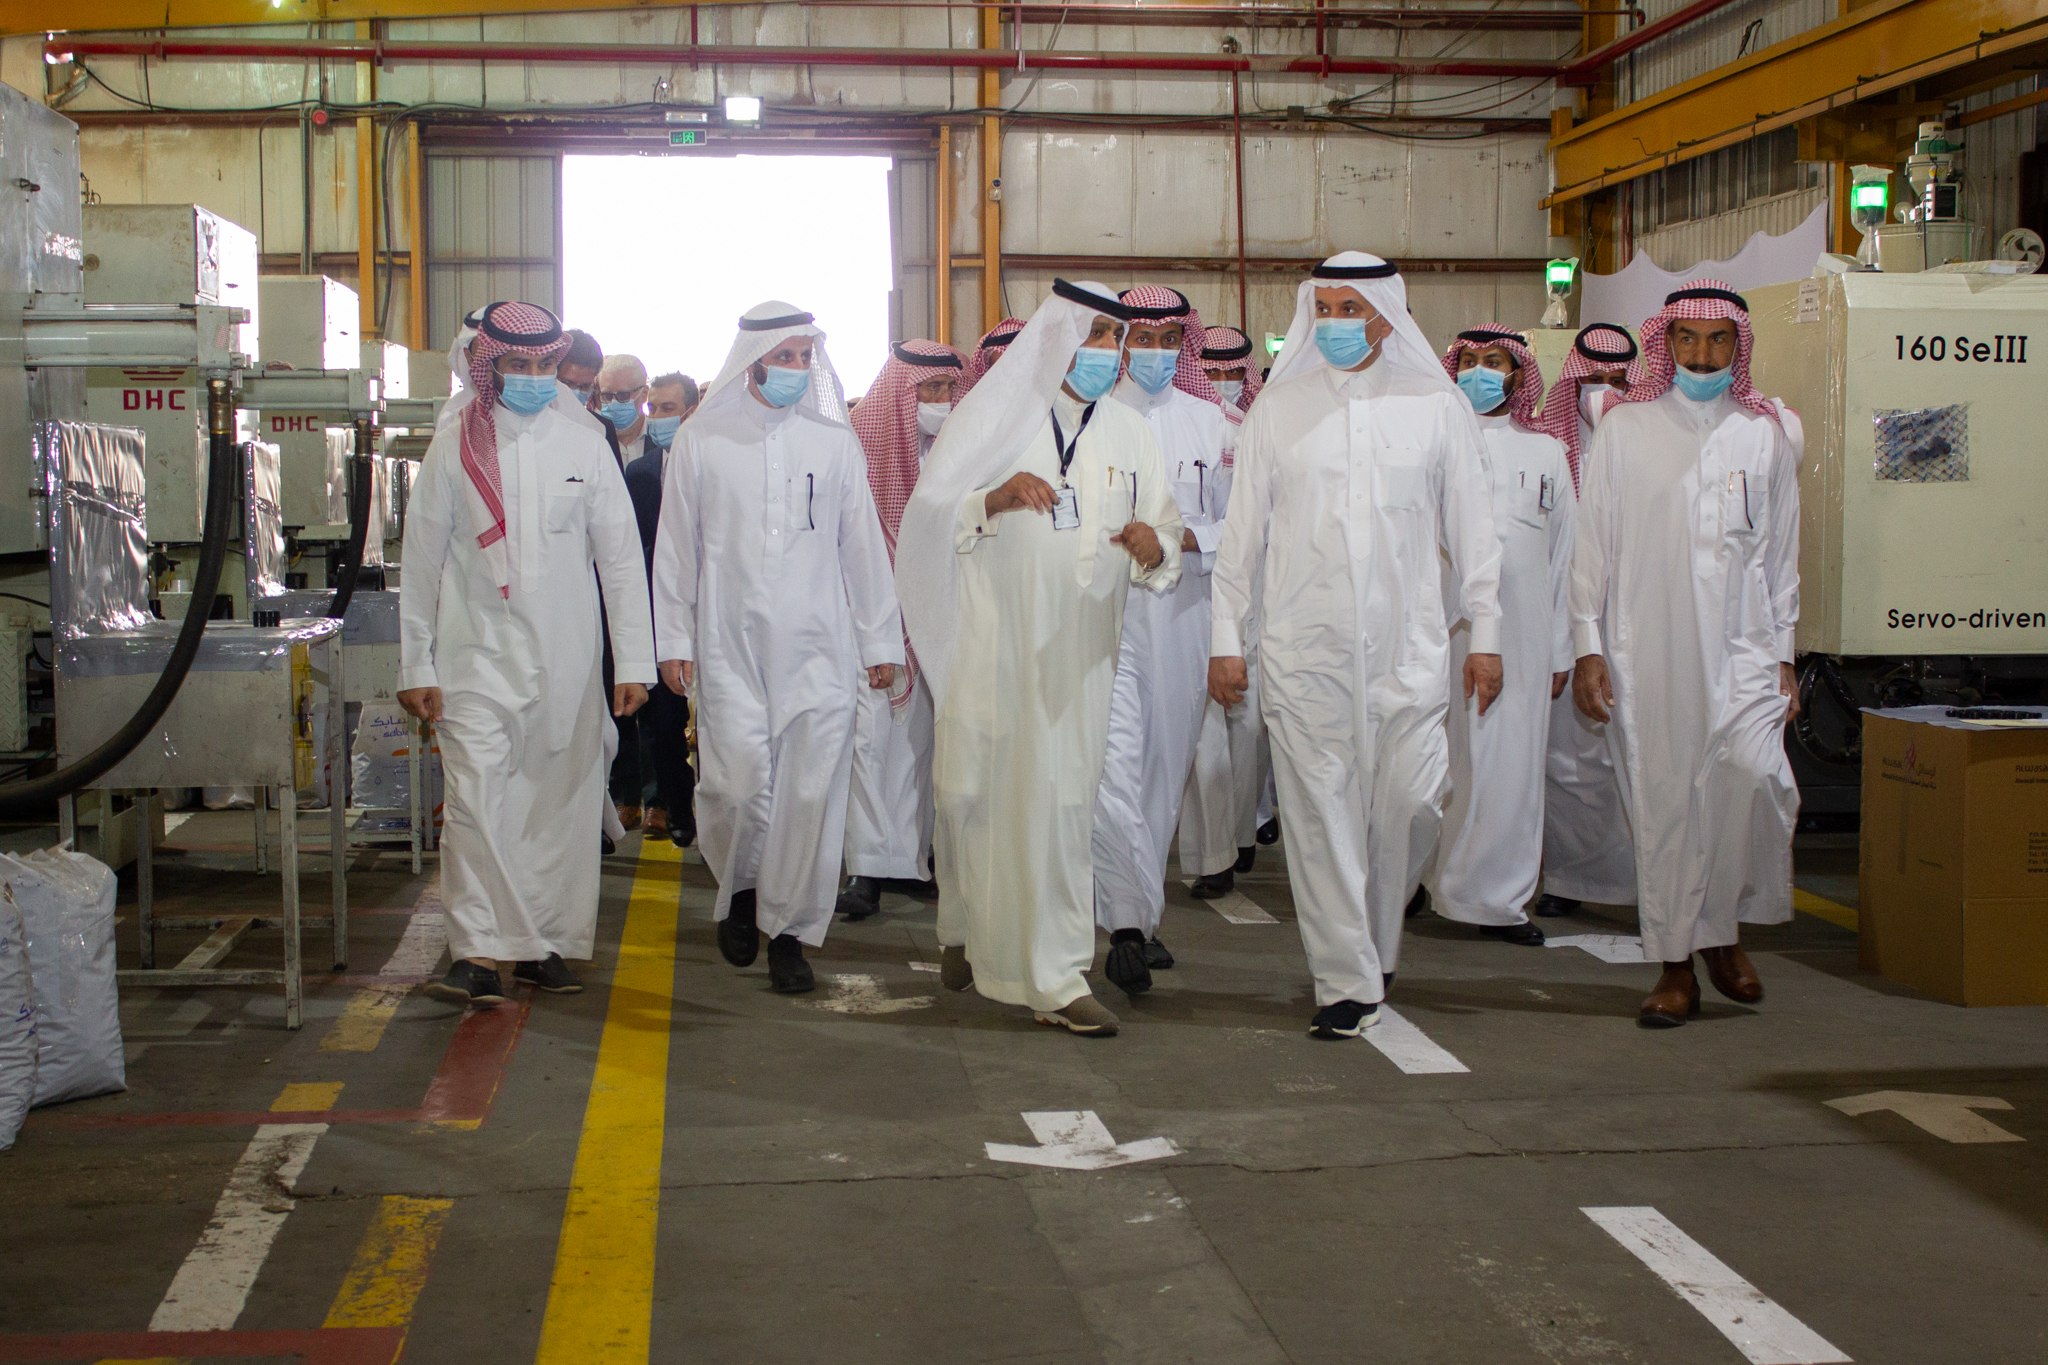 Alwasail was visited by the Minister of Environment, Water and Agriculture